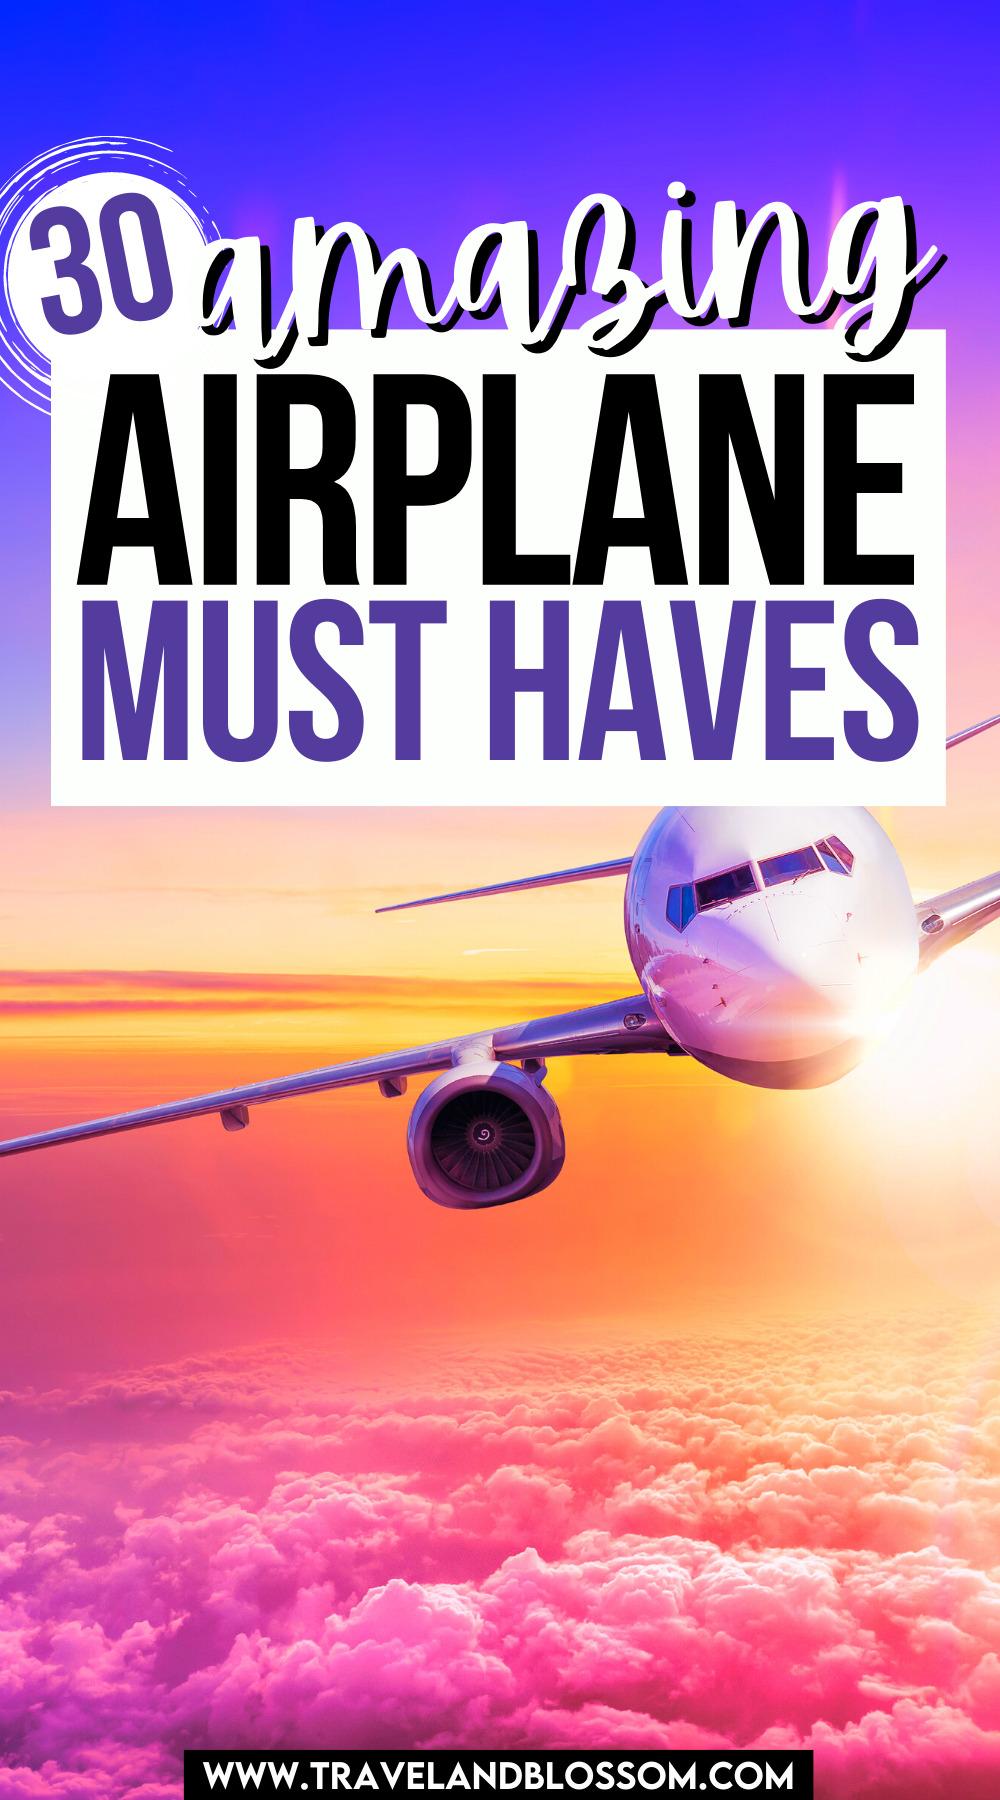 30 Airplane Must Haves For Every Flight